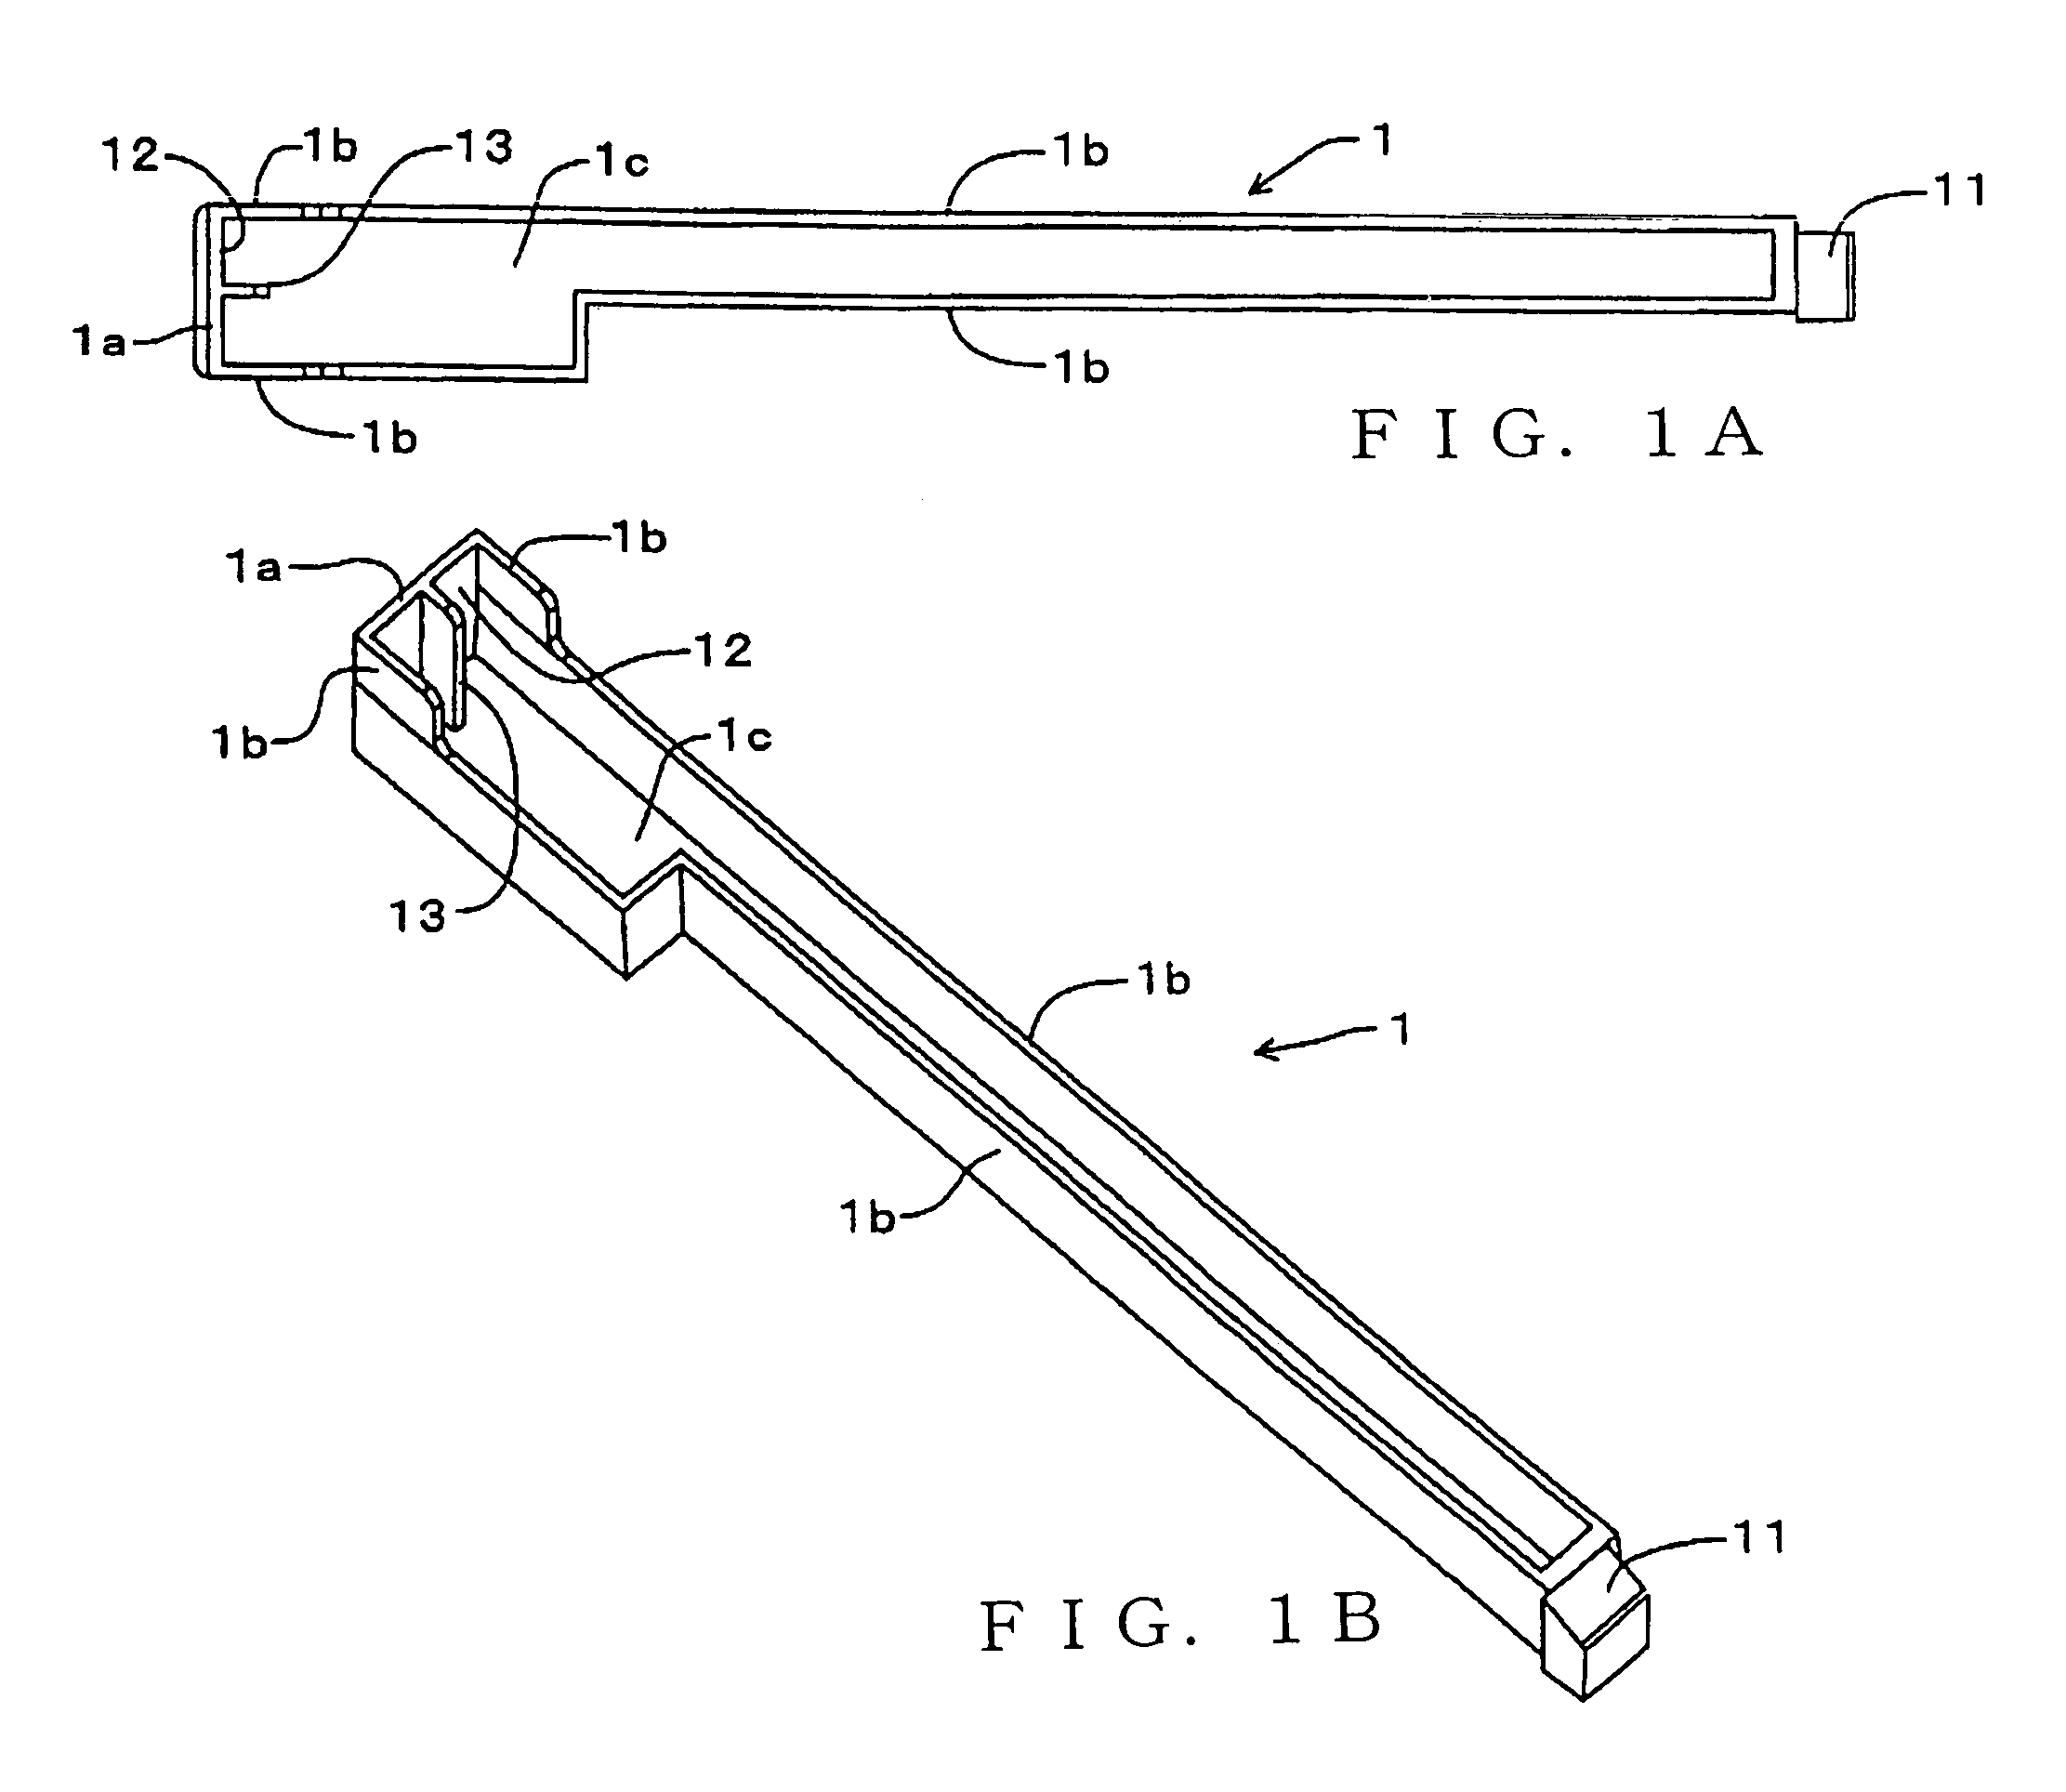 Key guide structure in keyboard apparatus